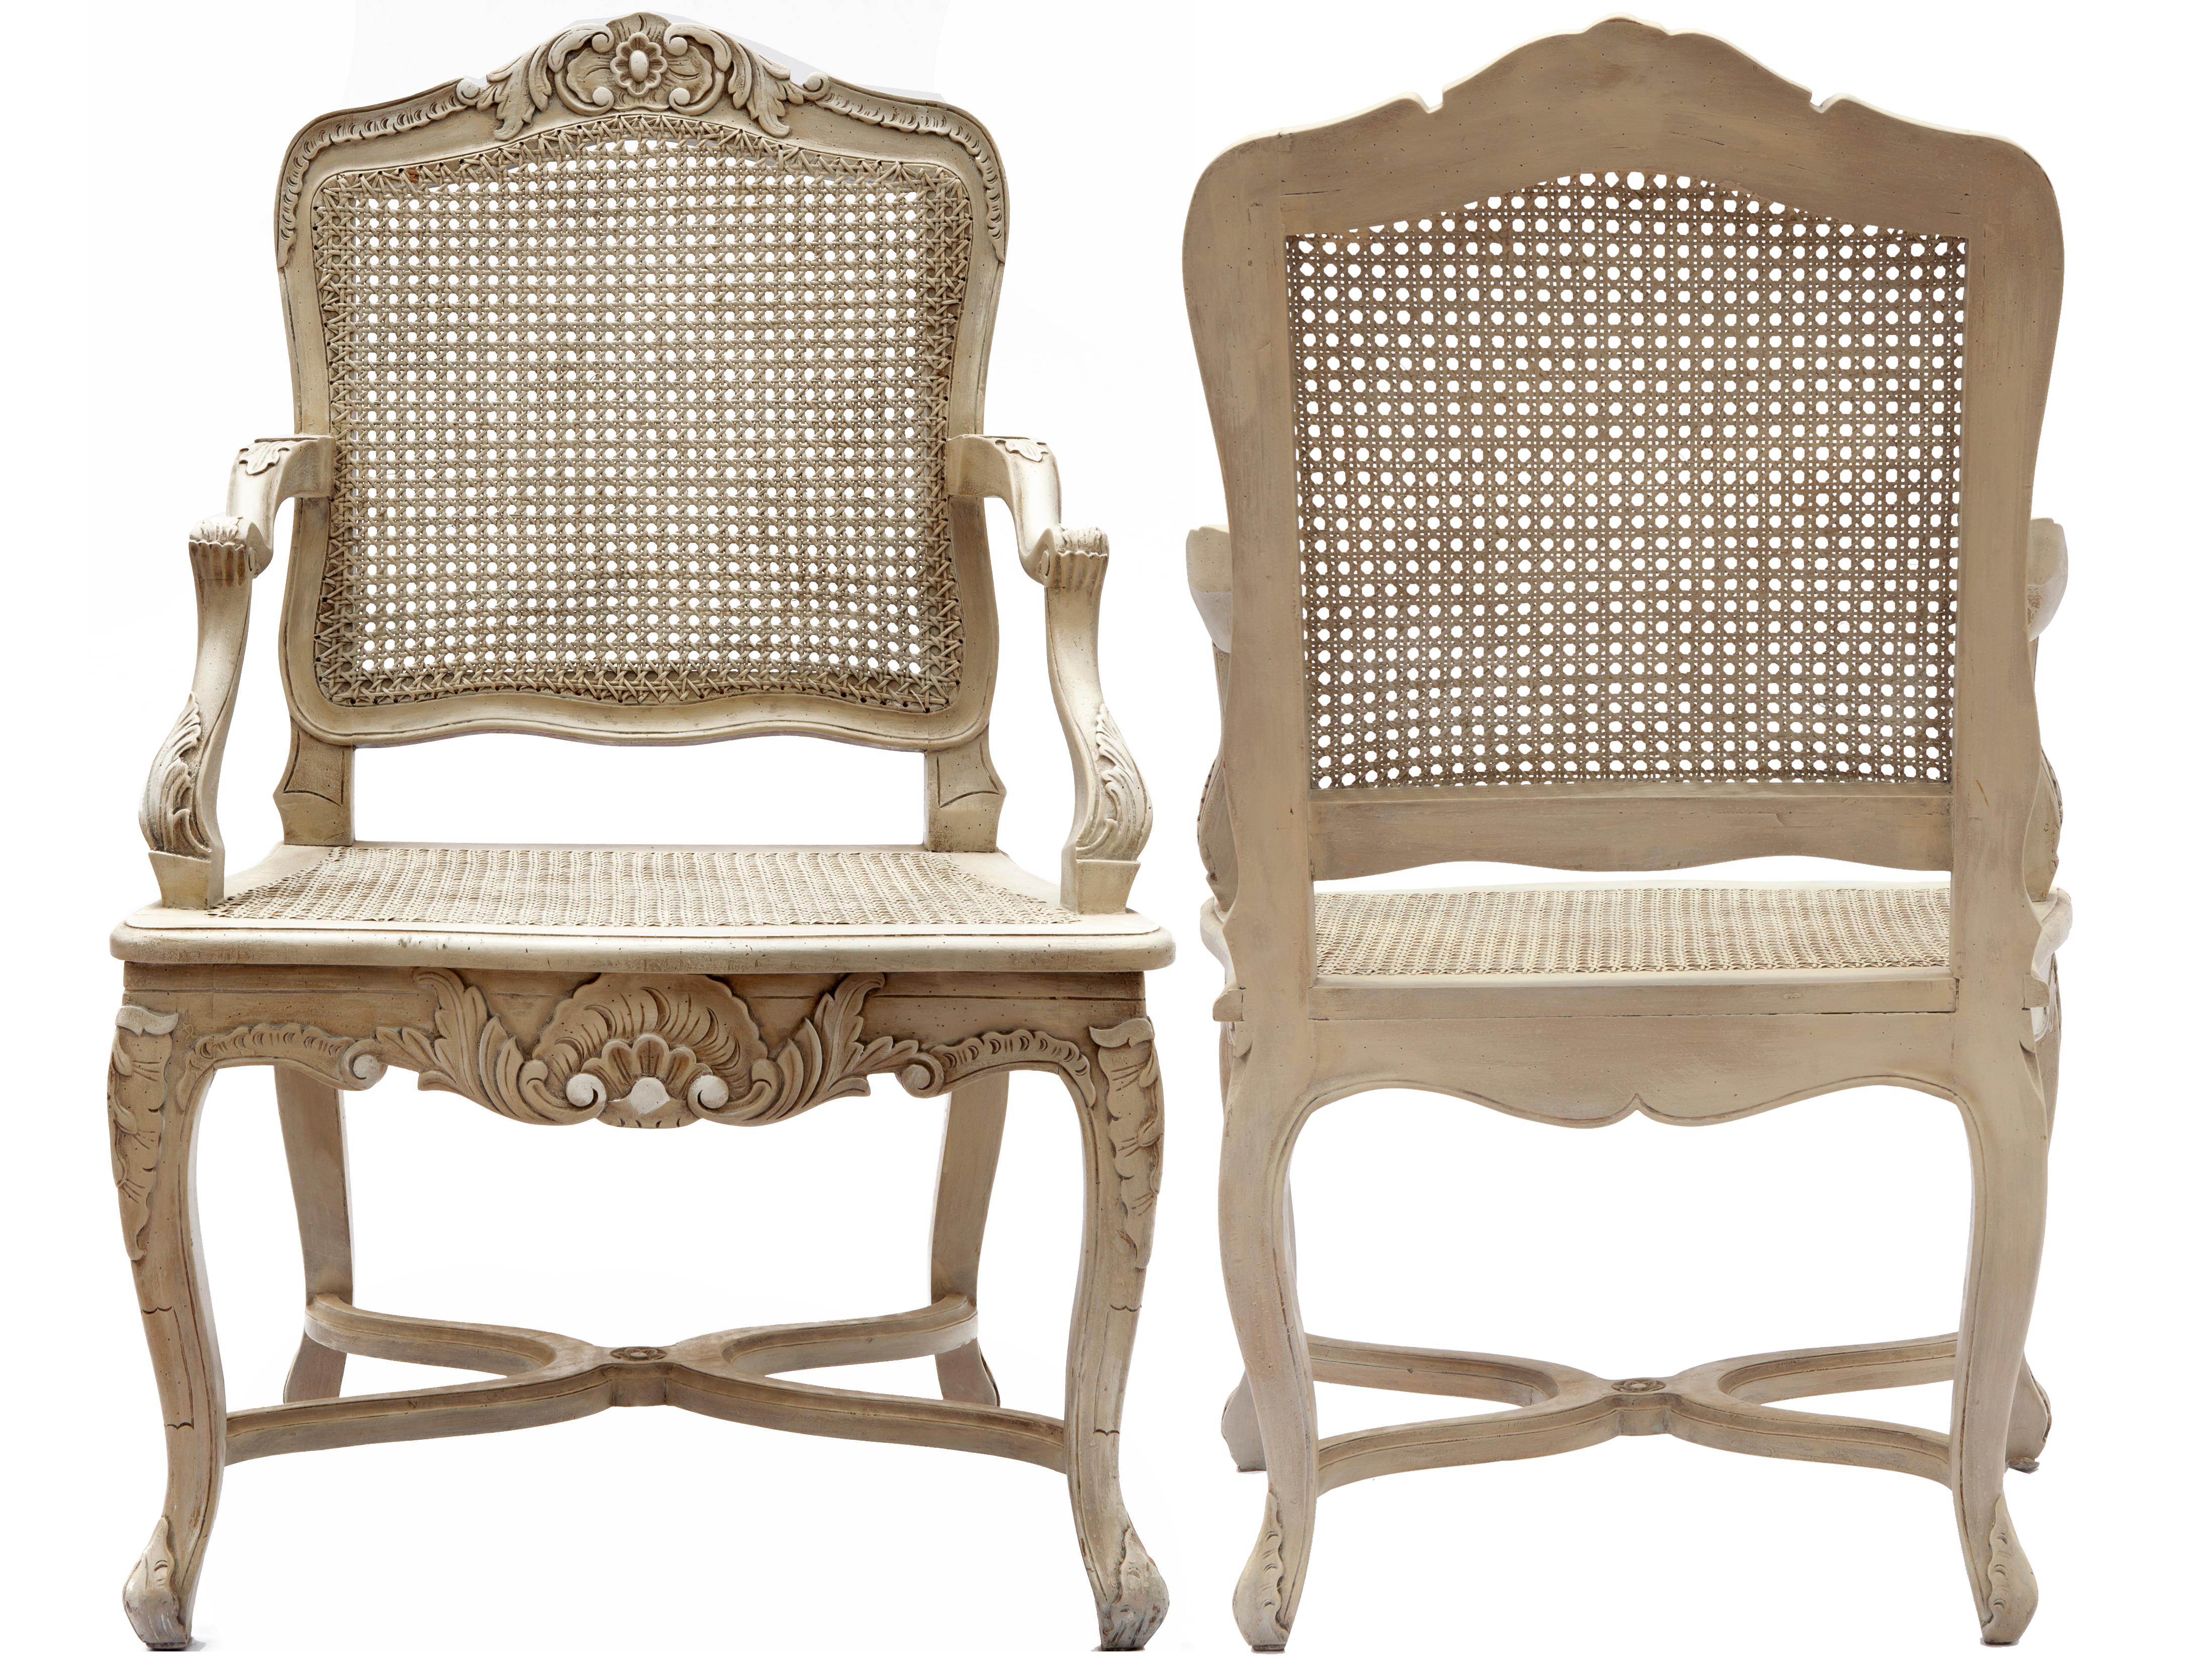 Early 20th Century Italian hand carved and caned armchairs. The natural cane back and seats have been stripped to a nude finish. The chairs are in excellent condition with little to no wear. Some difference in the cane coloring.
Intact strong and